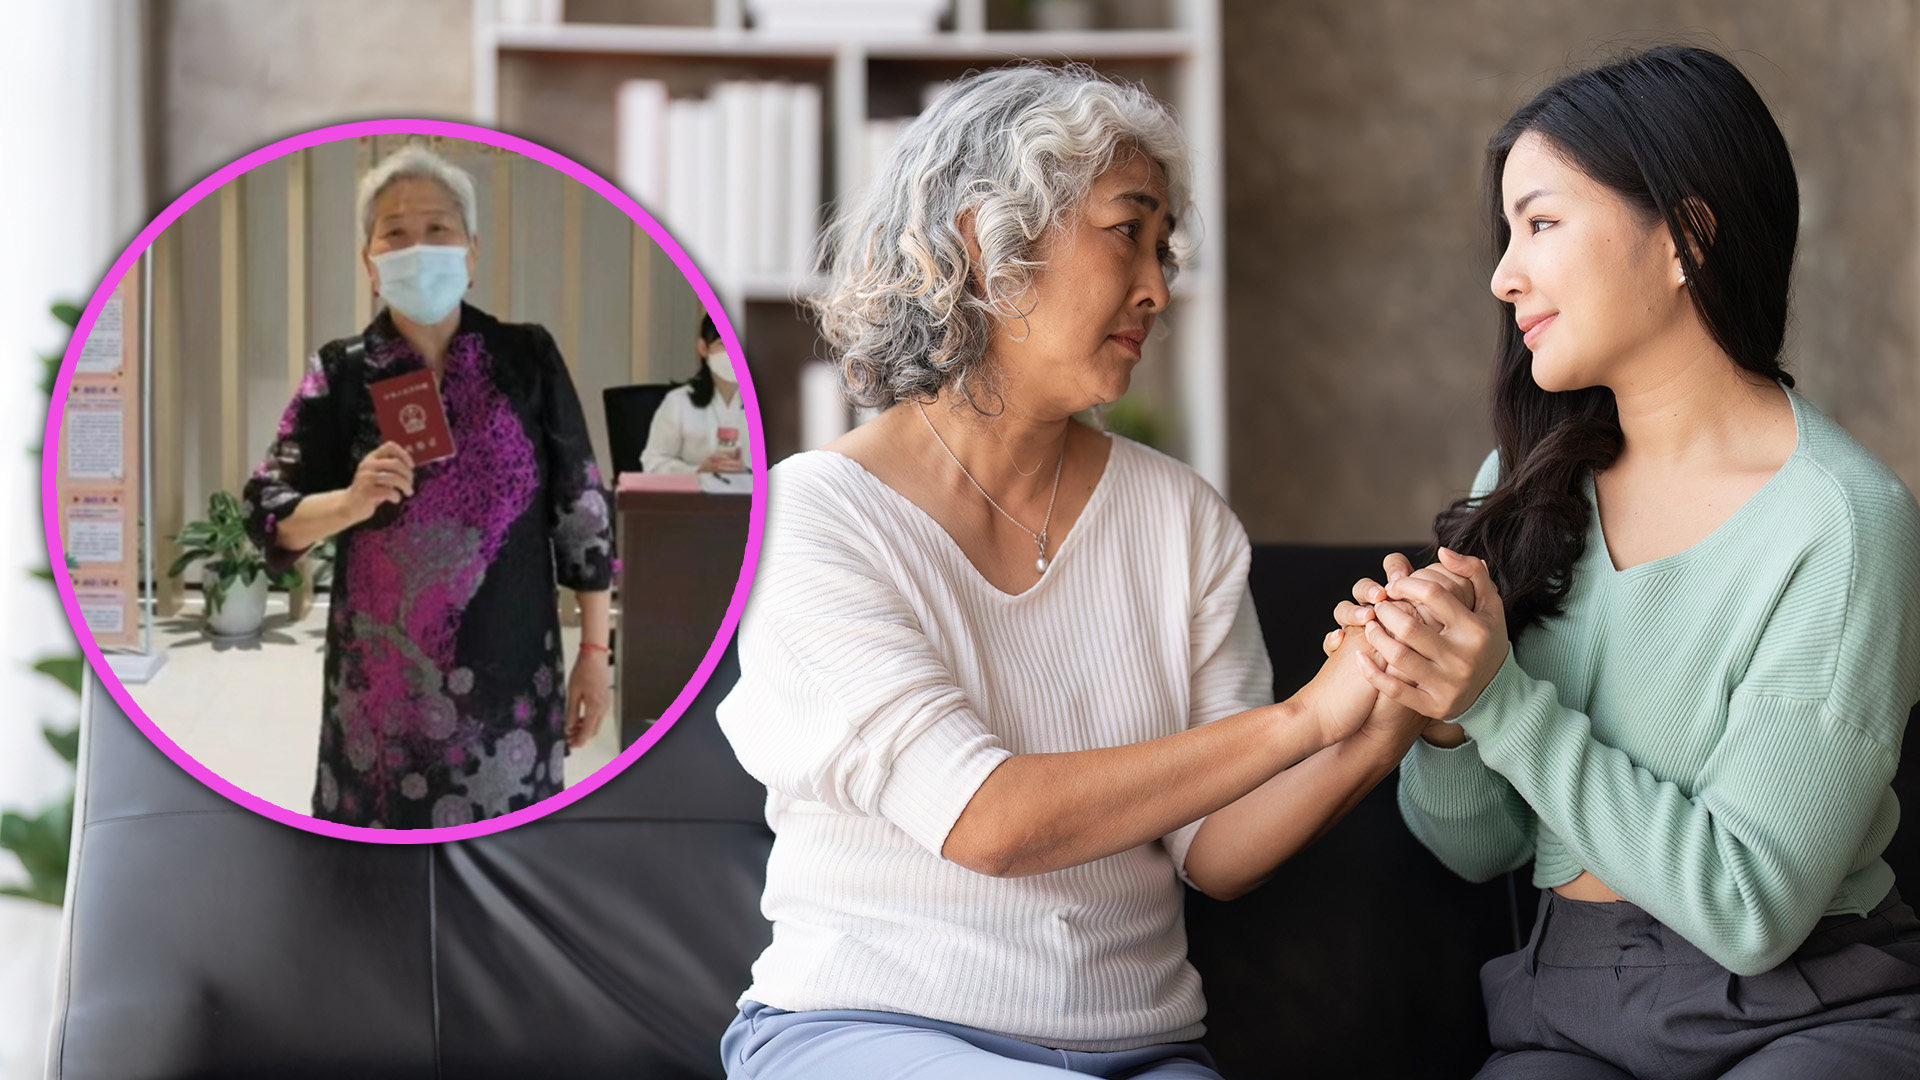 A young woman in China who supported her elderly grandmother in her decision to divorce her unfaithful husband says her grandma’s bravery should inspire others in miserable relationships to do likewise, regardless of their age. Photo: SCMP composite/Shutterstock/Weibo